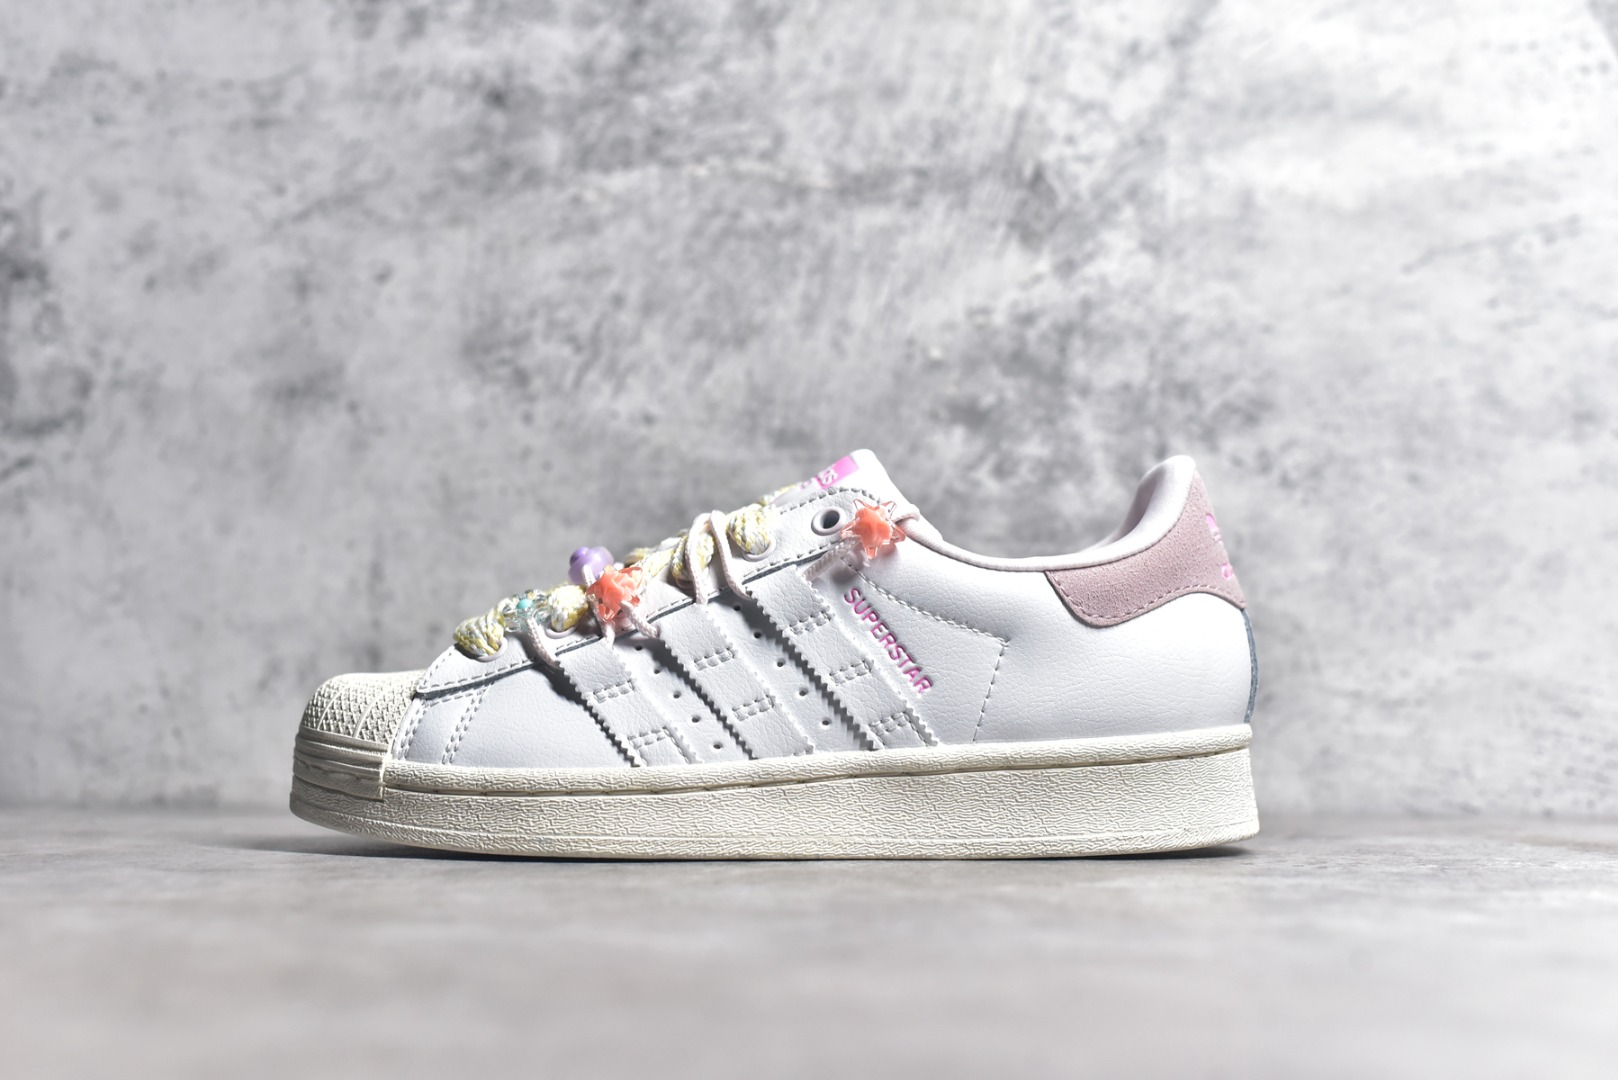 Adidas Originals Superstar Cream White Pin K “Classic Shell Head Series Low Top Casual Shoes